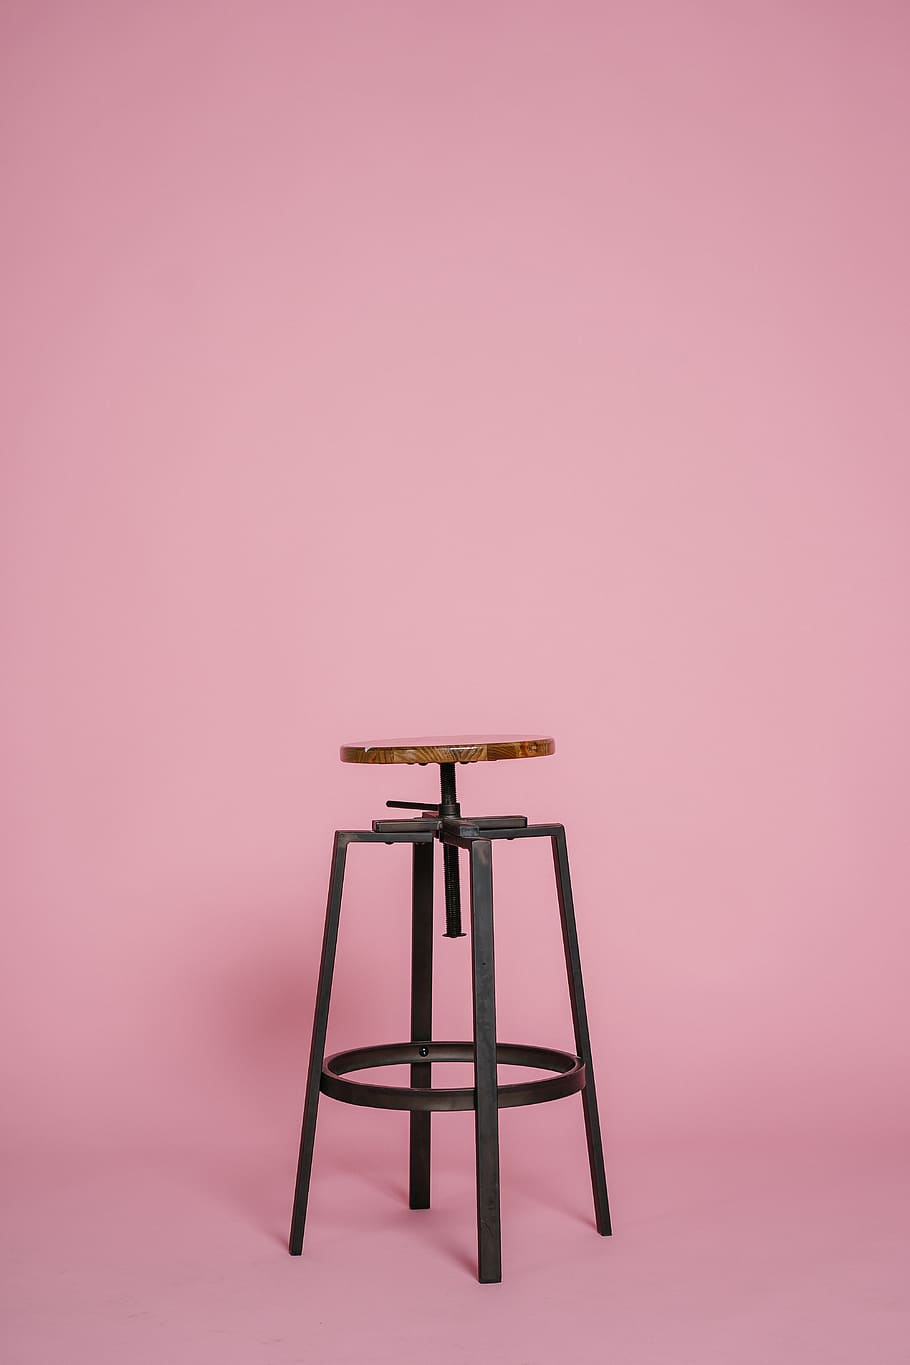 HD wallpaper: Metal Stool, chair, seat, pink color, indoors, studio shot,  colored background | Wallpaper Flare